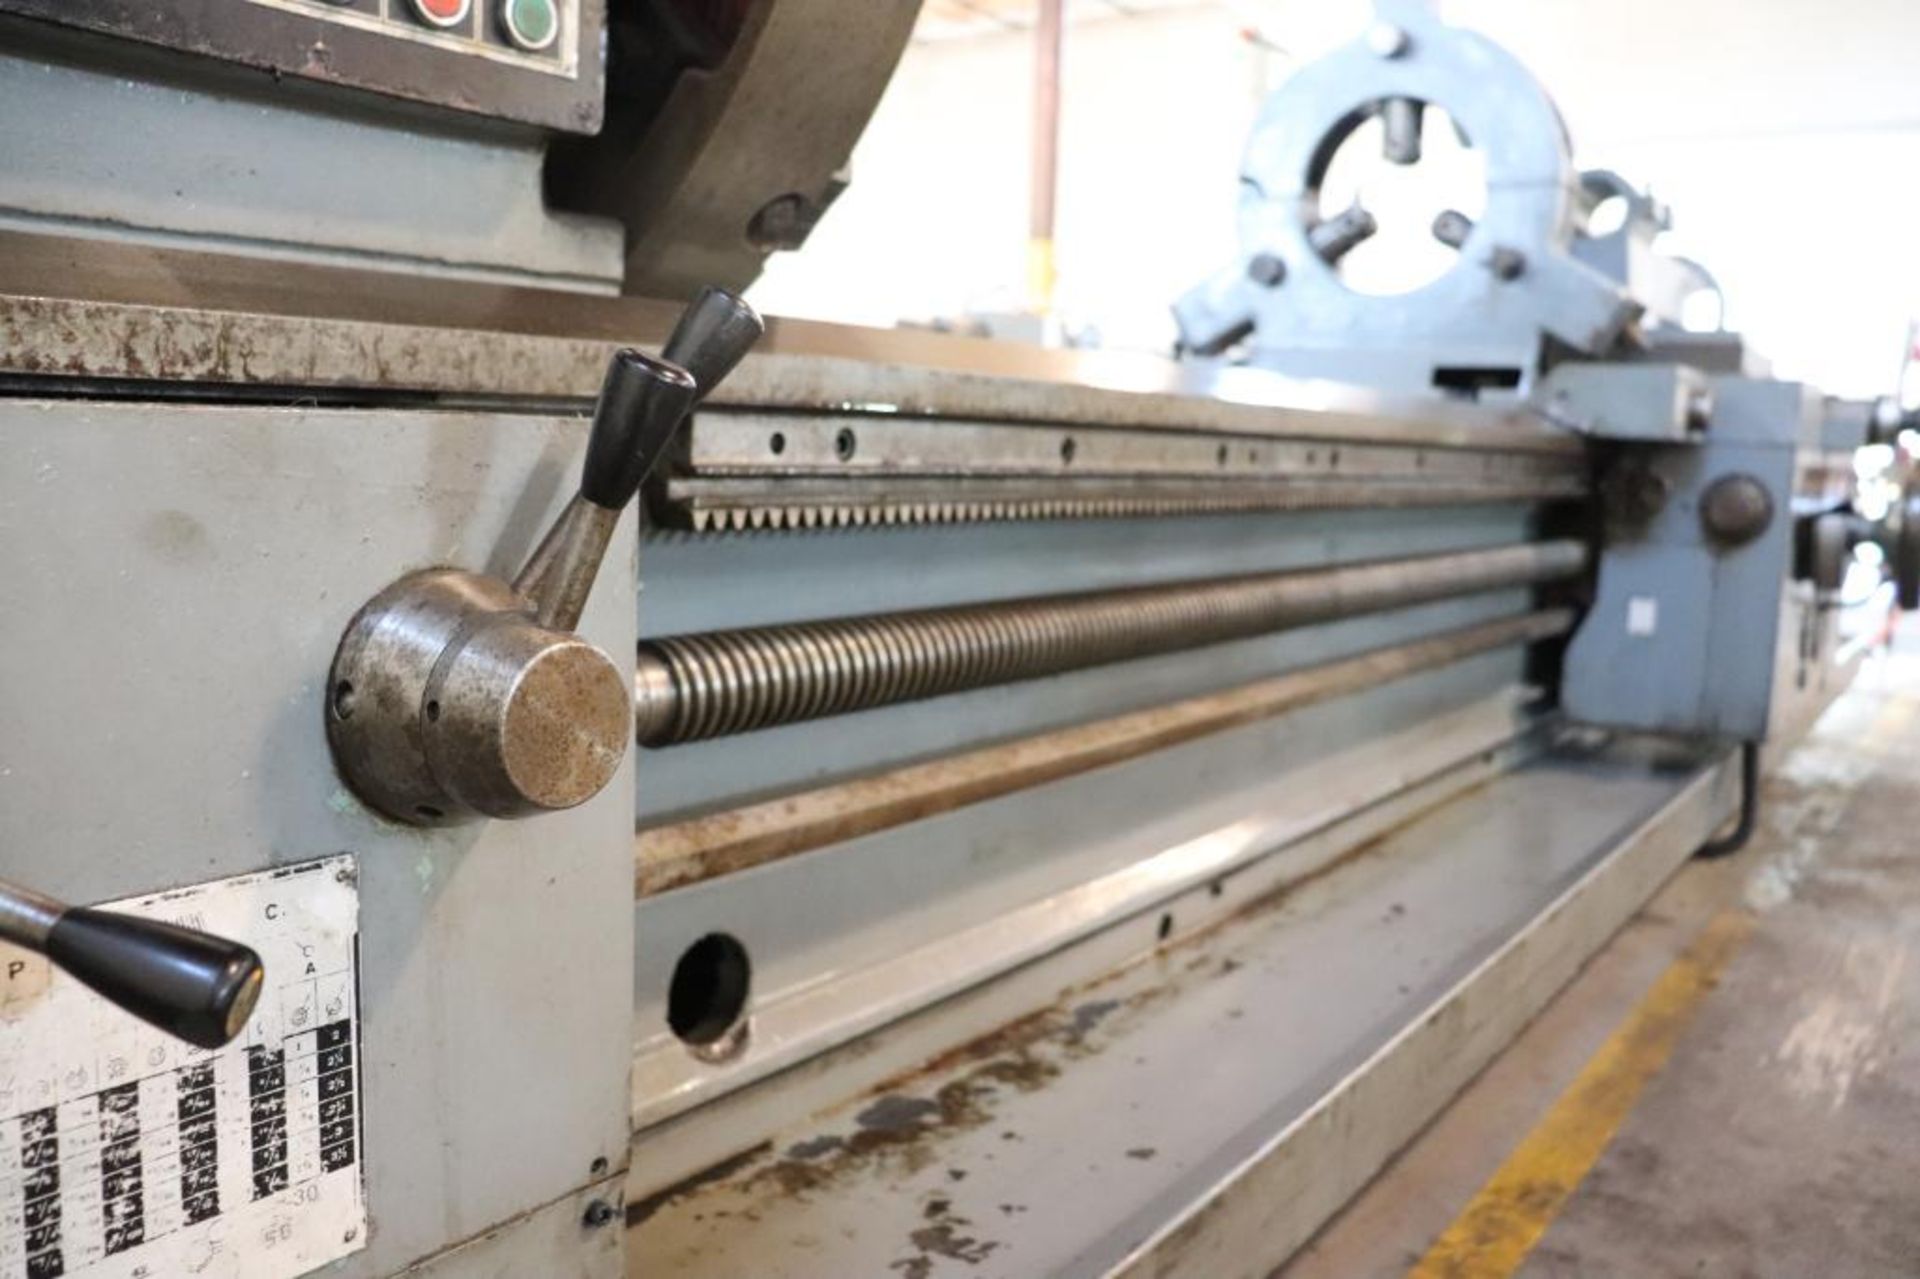 Tos SUS 80 33" x 140" Geared head lathe - Image 11 of 27